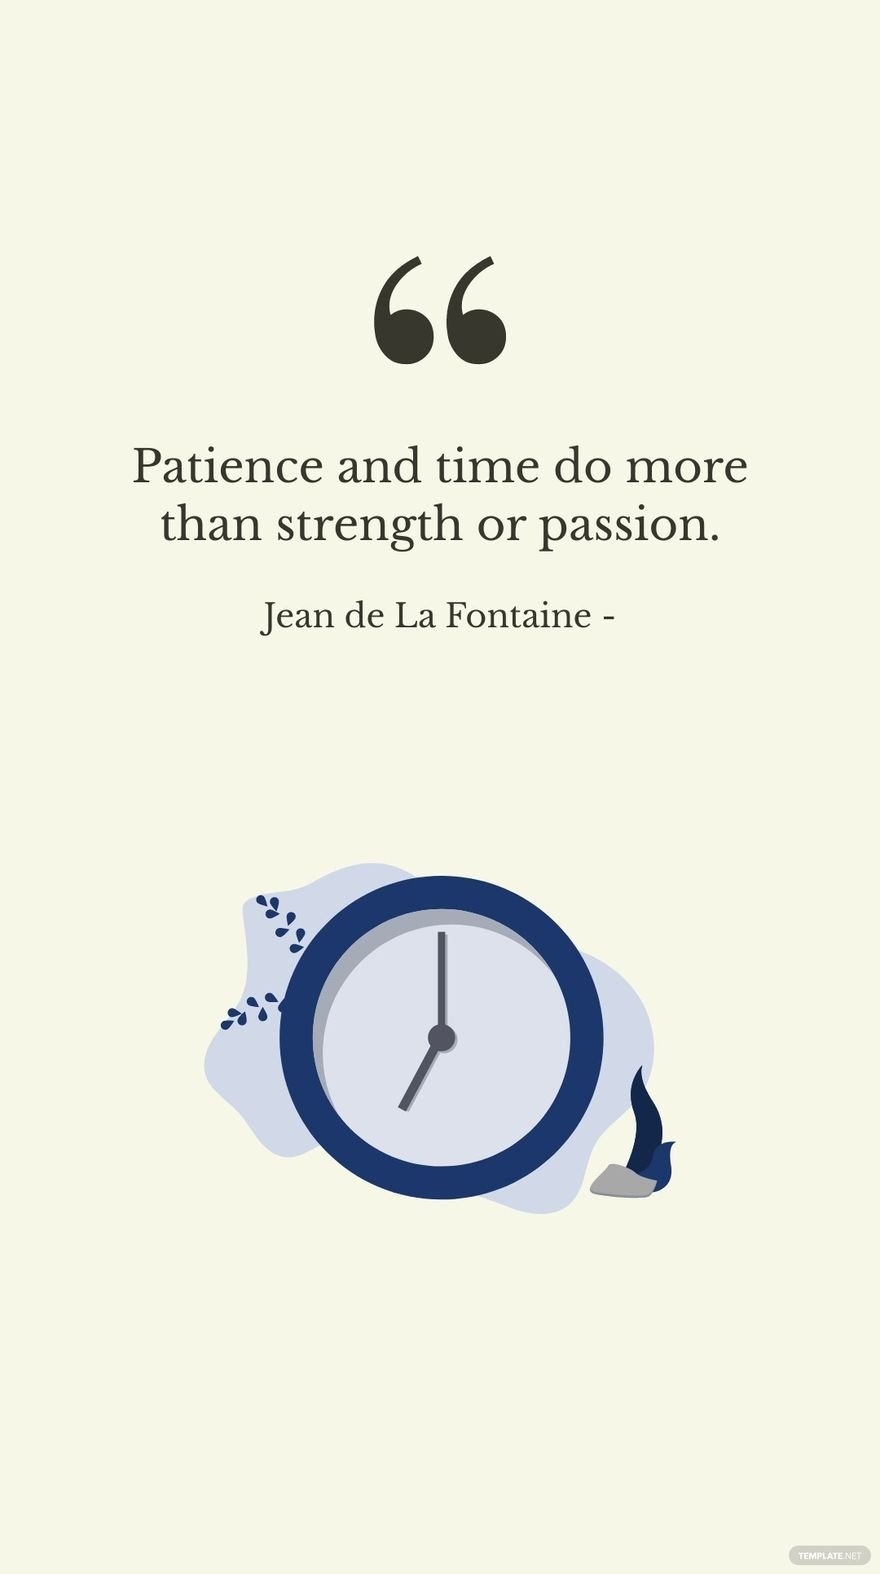 Jean de La Fontaine - Patience and time do more than strength or passion.